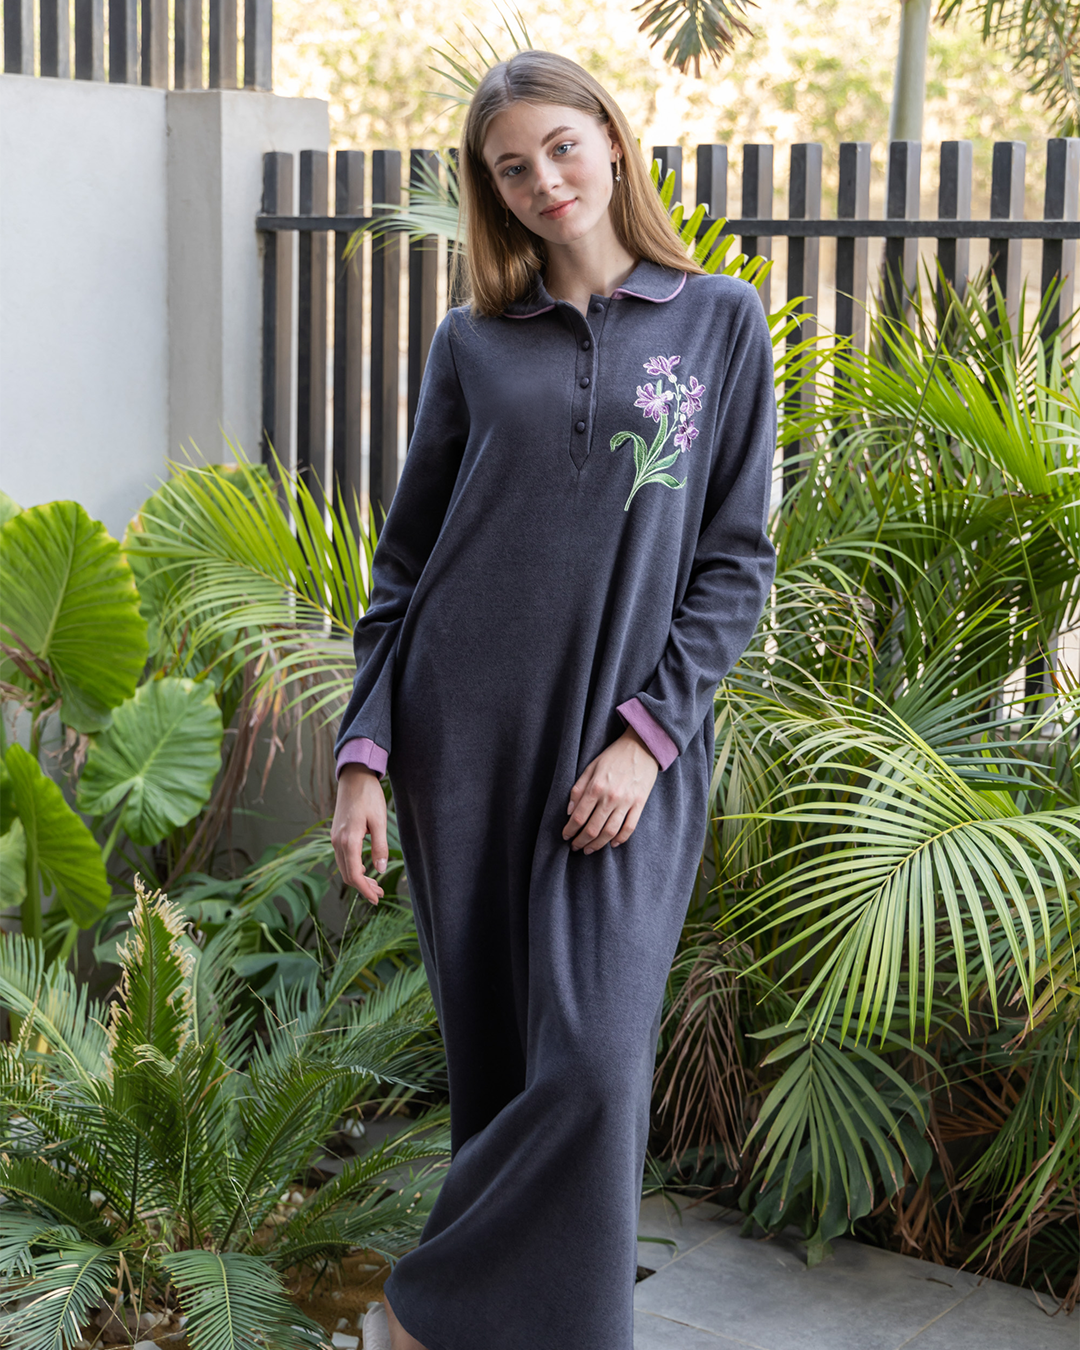 Women's nightgown, cashmere, collar and rose embroidered with a bouquet